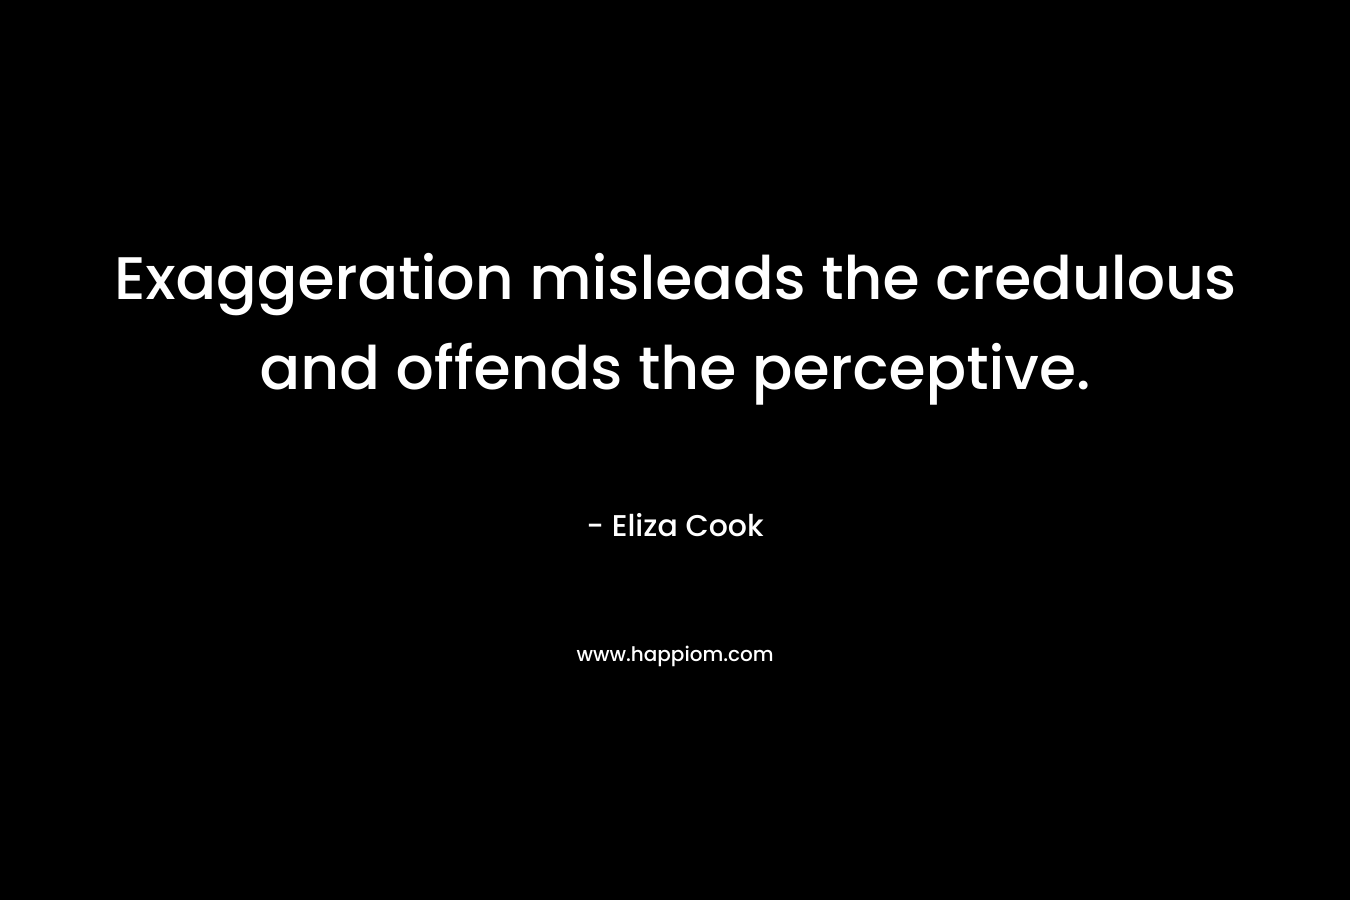 Exaggeration misleads the credulous and offends the perceptive. – Eliza Cook